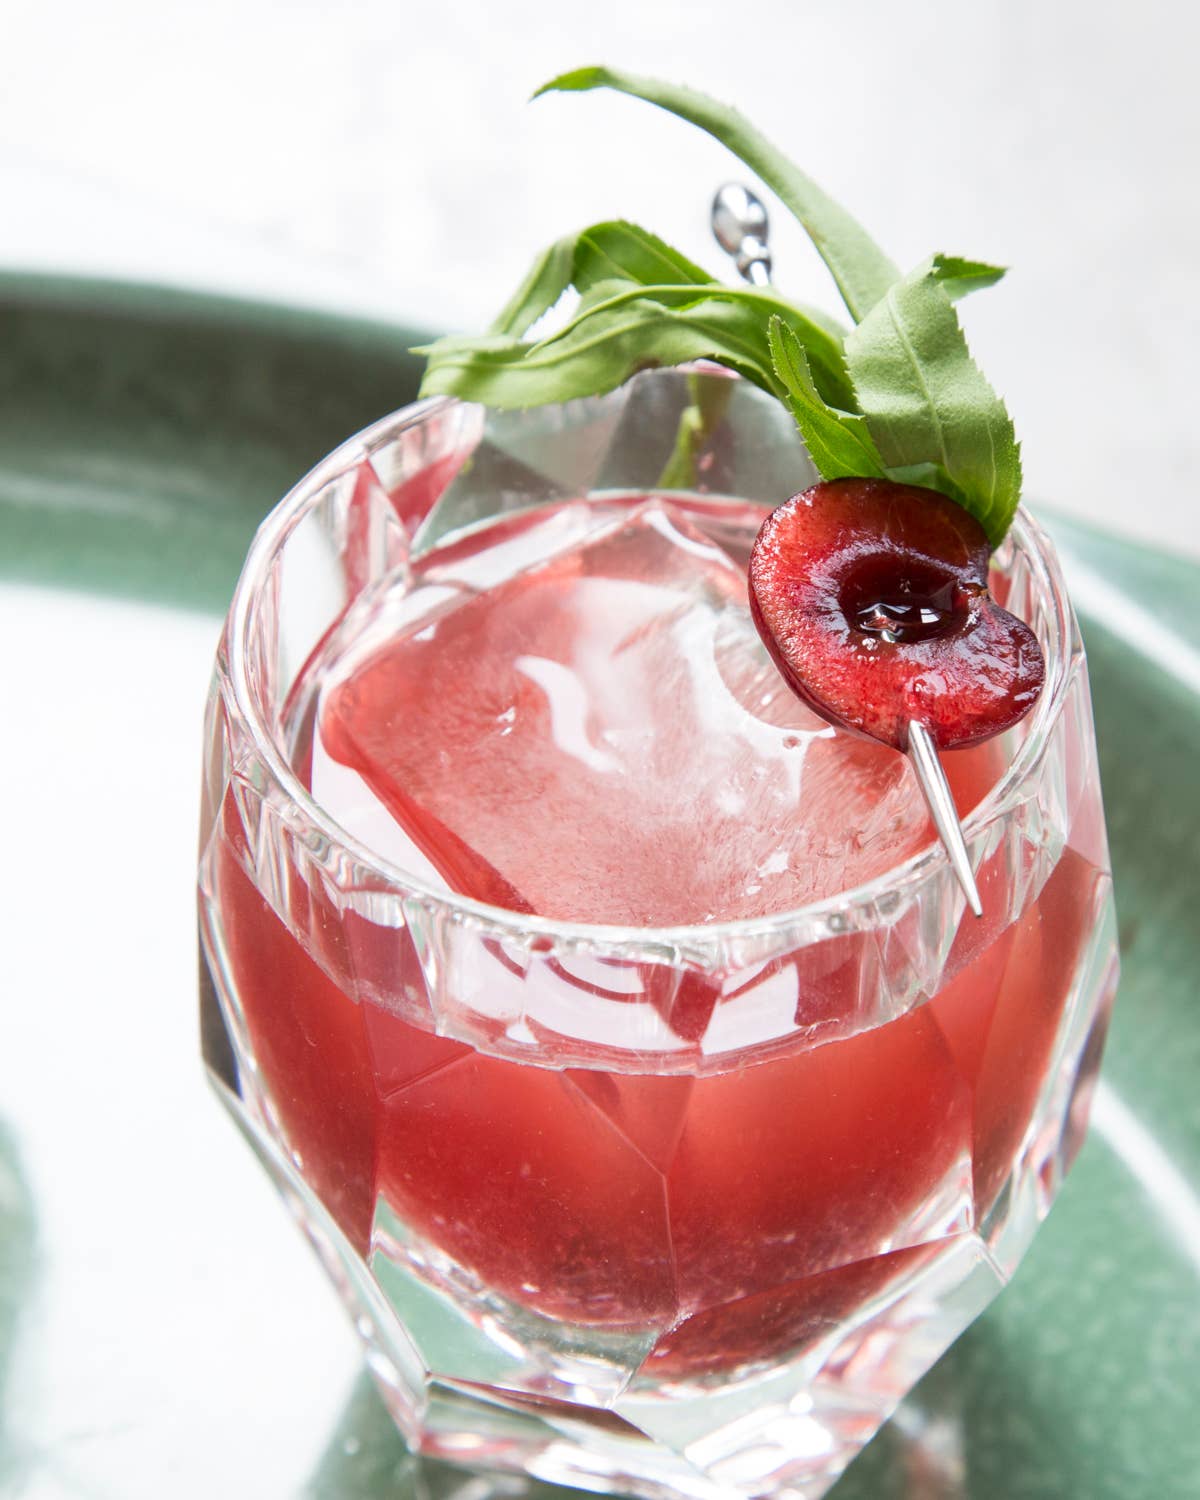 Sweet Summer Cherries Deserve a Place in Your Drink